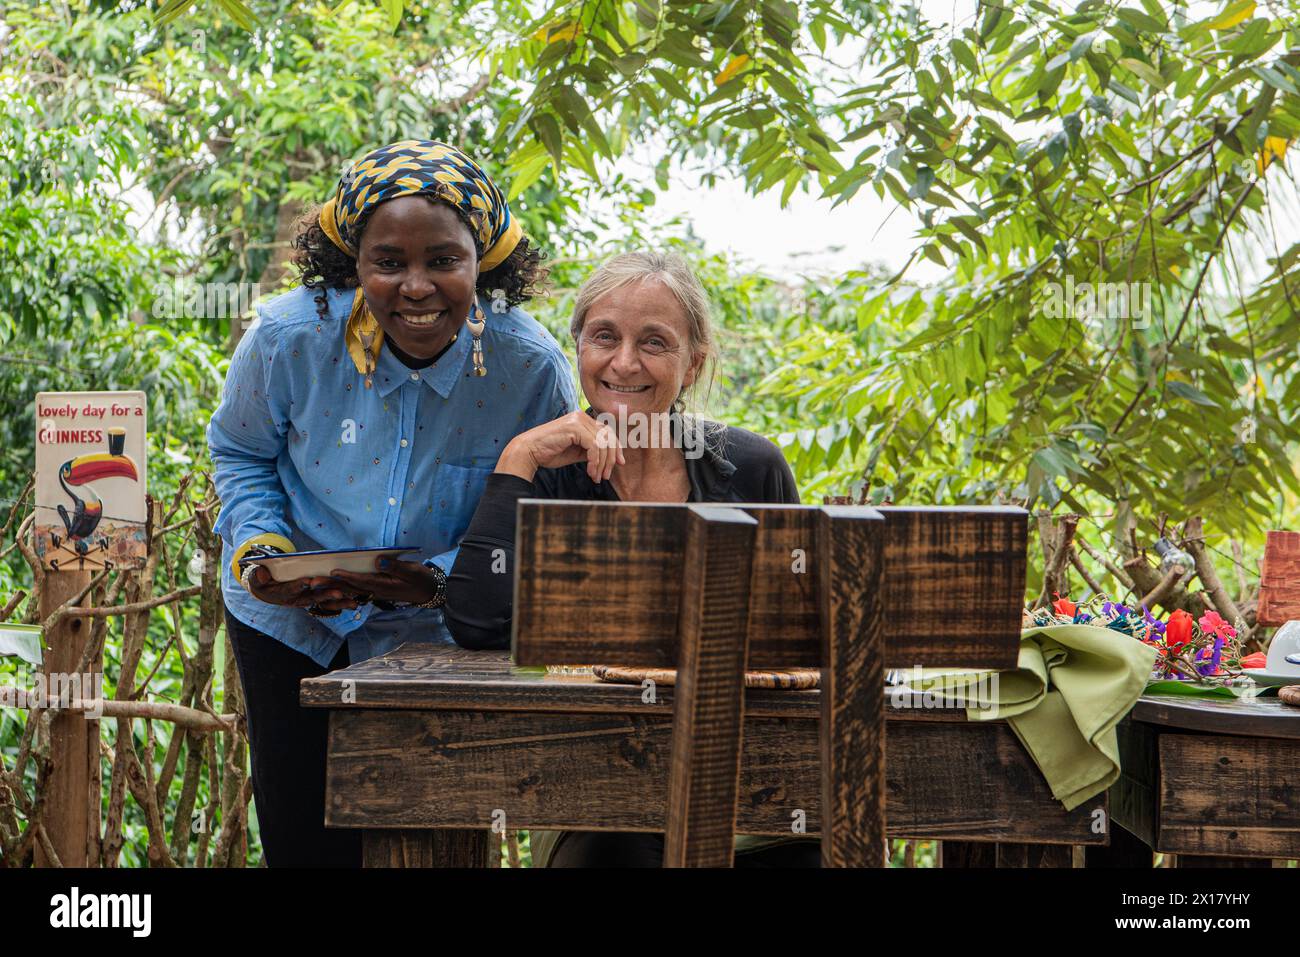 The director of Mabamba Lodge and a hotel guest share a warm, friendly pose, both smiling at the camera. The director wears a vibrant headscarf, and h Stock Photo